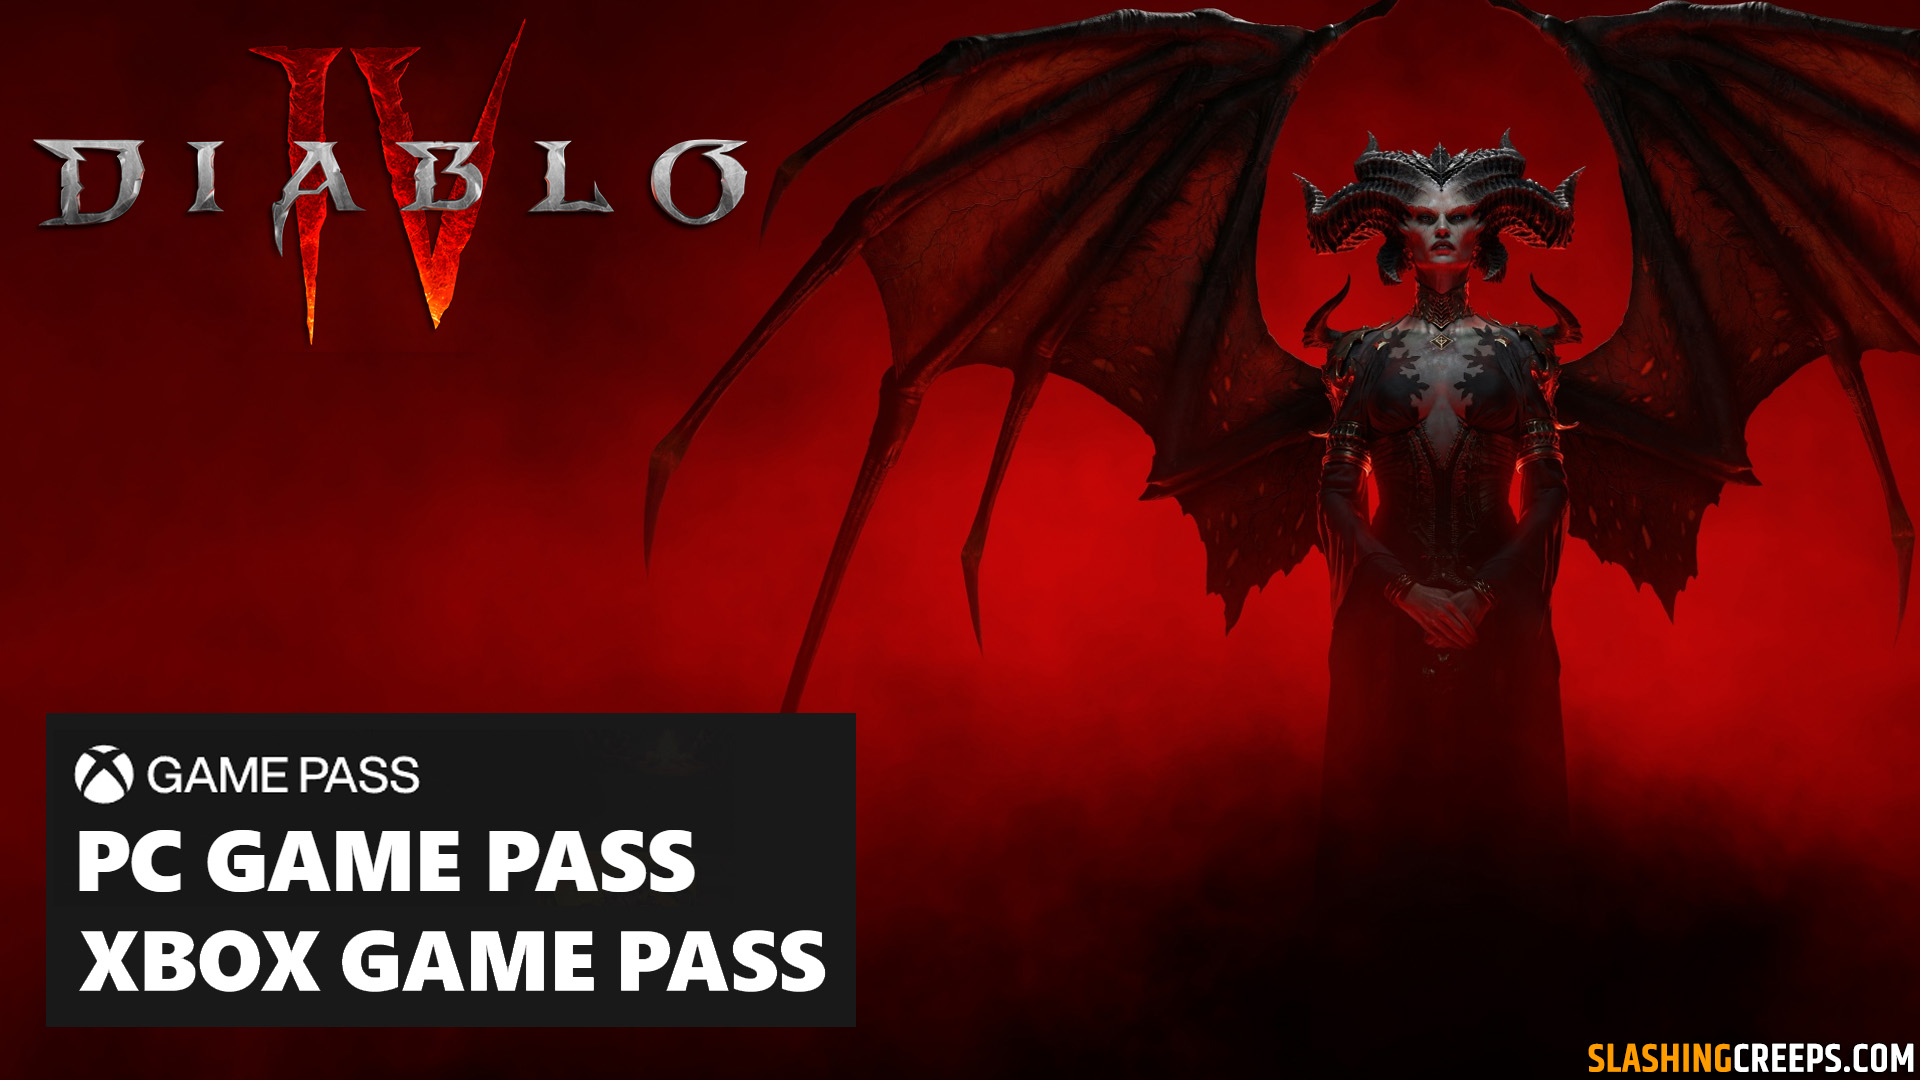 Pc Game Pass or Xbox Game Pass Diablo 4, everything you need to know about the game